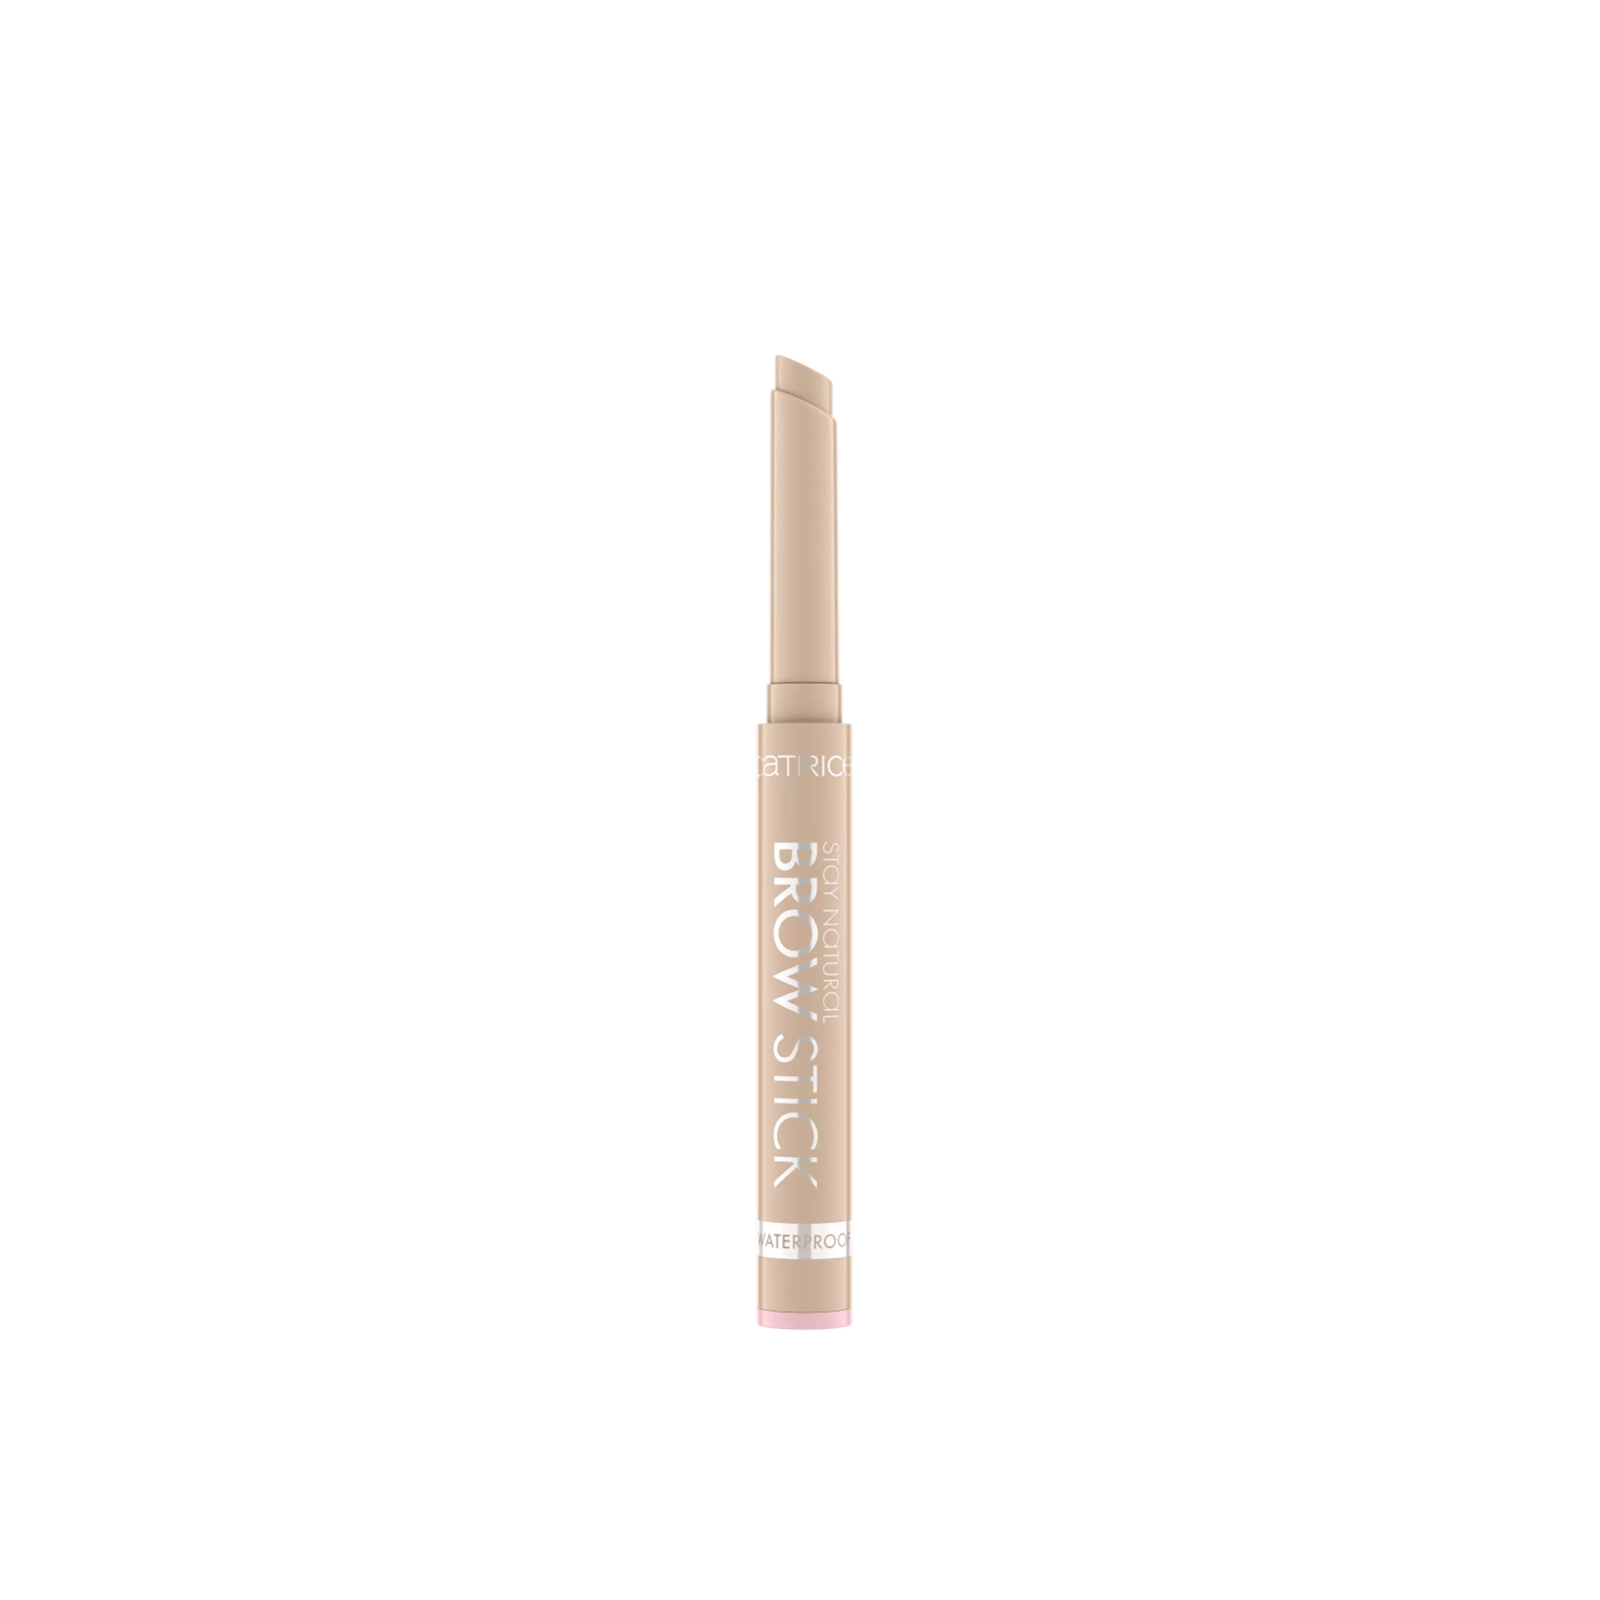 Catrice Stay Natural Waterproof Brow Stick